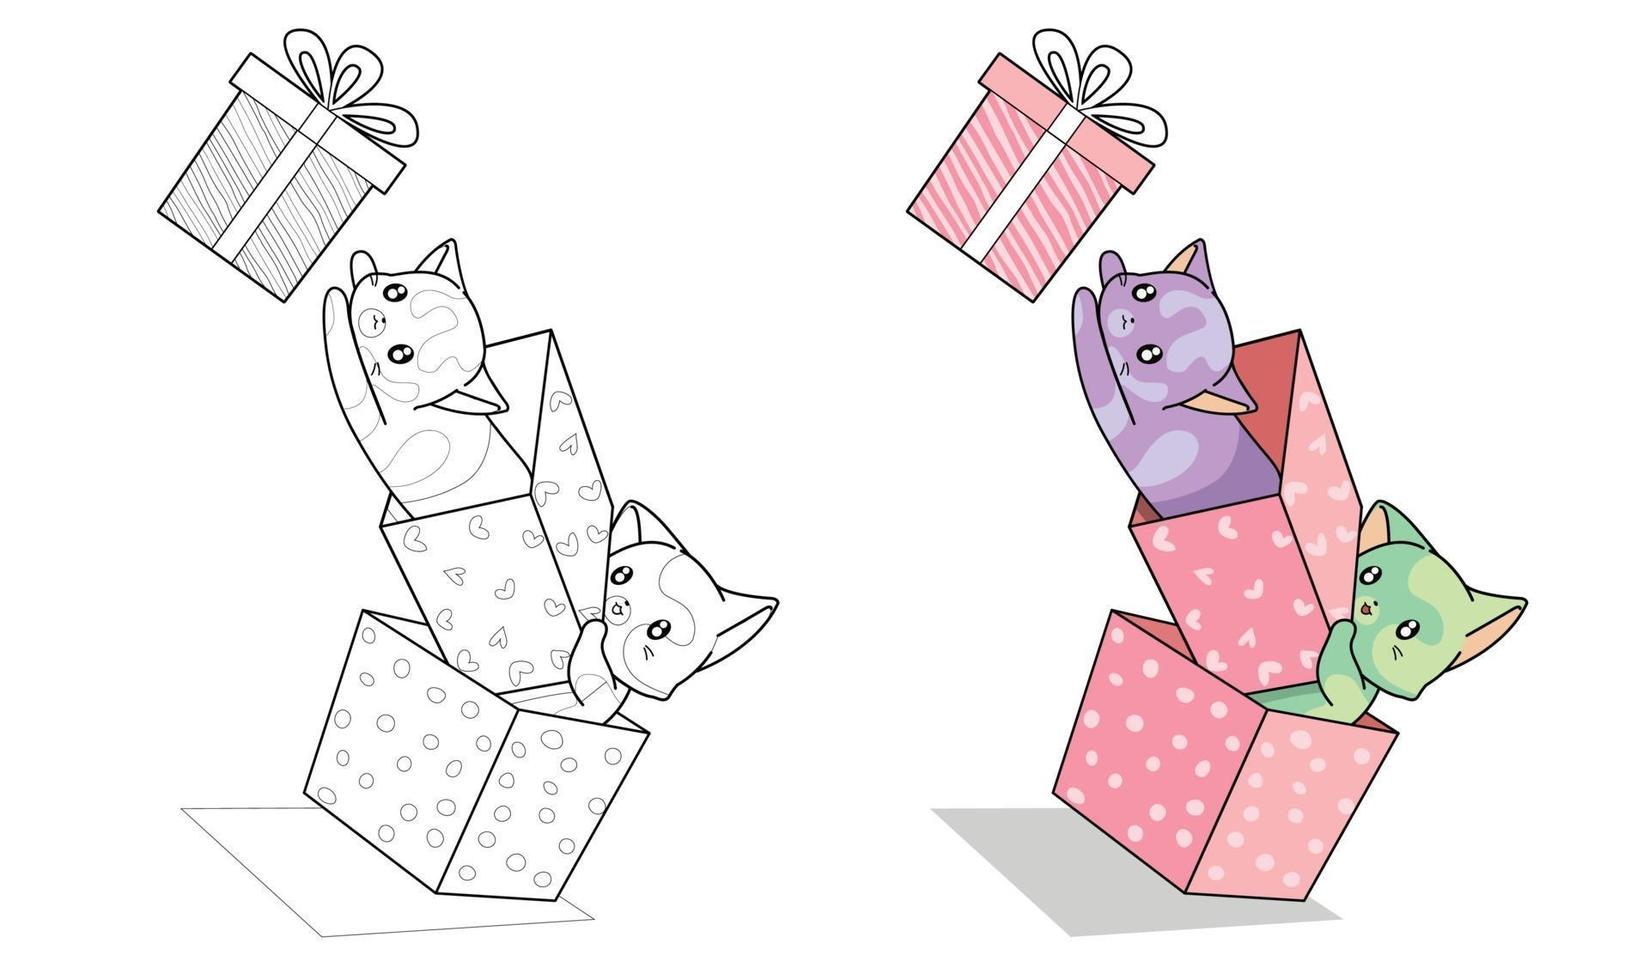 Cats in box and gift box cartoon easily coloring page for kids vector